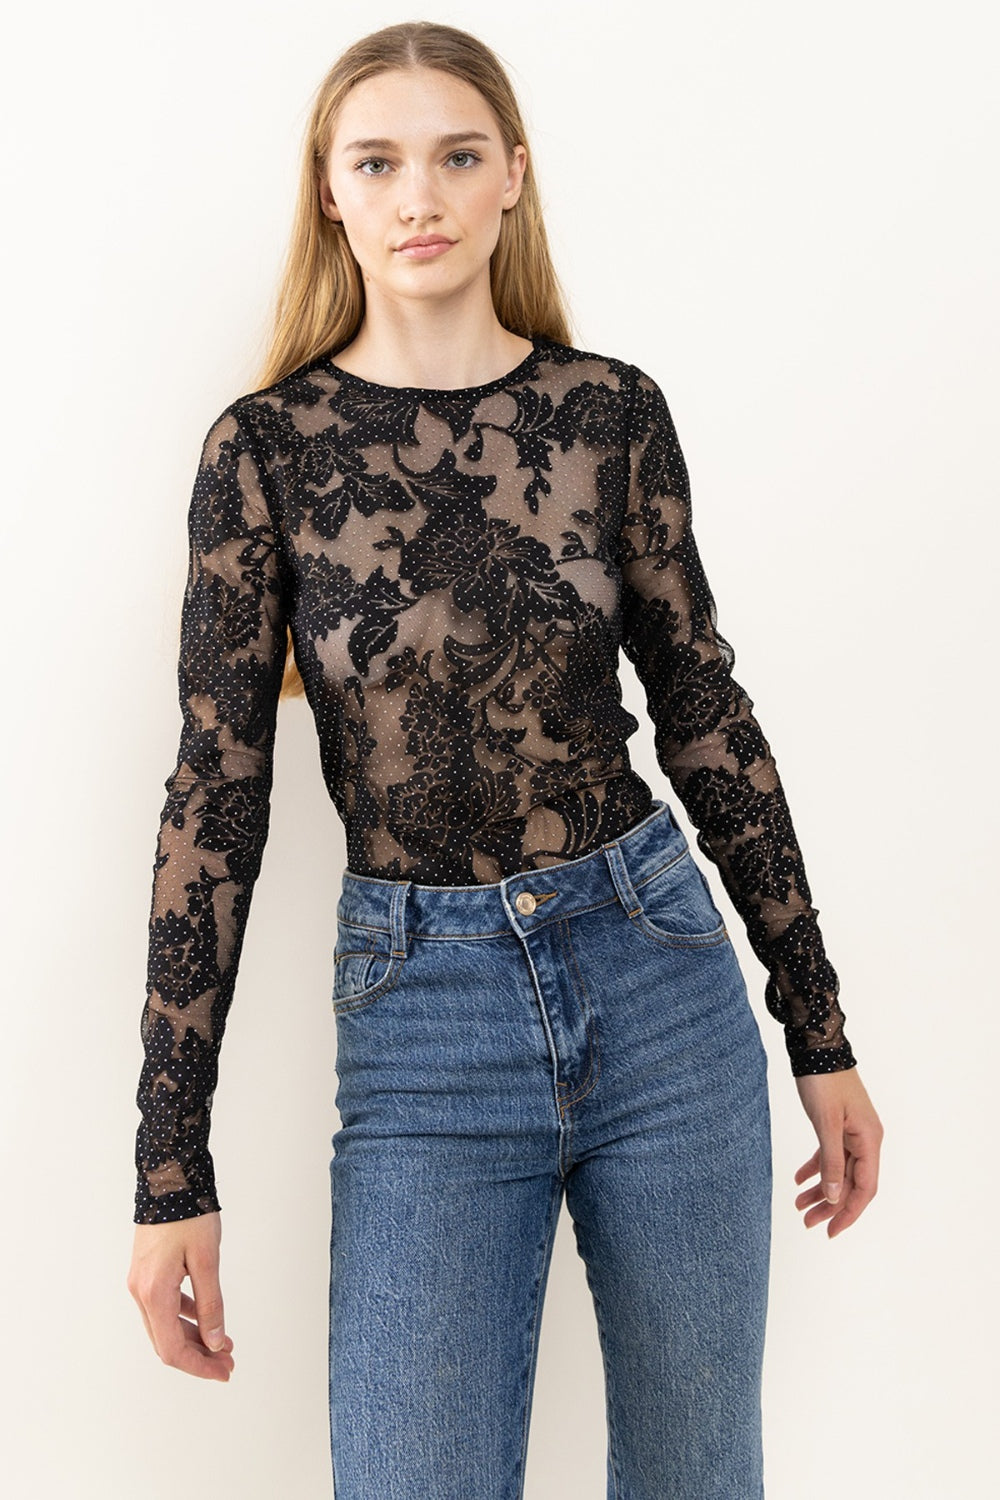 The Floral Lace Mesh Bodysuit features delicate lace detailing and a flattering mesh fabric. The intricate floral design adds a touch of femininity and elegance to any outfit. Perfect for a night out or a special occasion, this bodysuit offers a stylish look. S - L